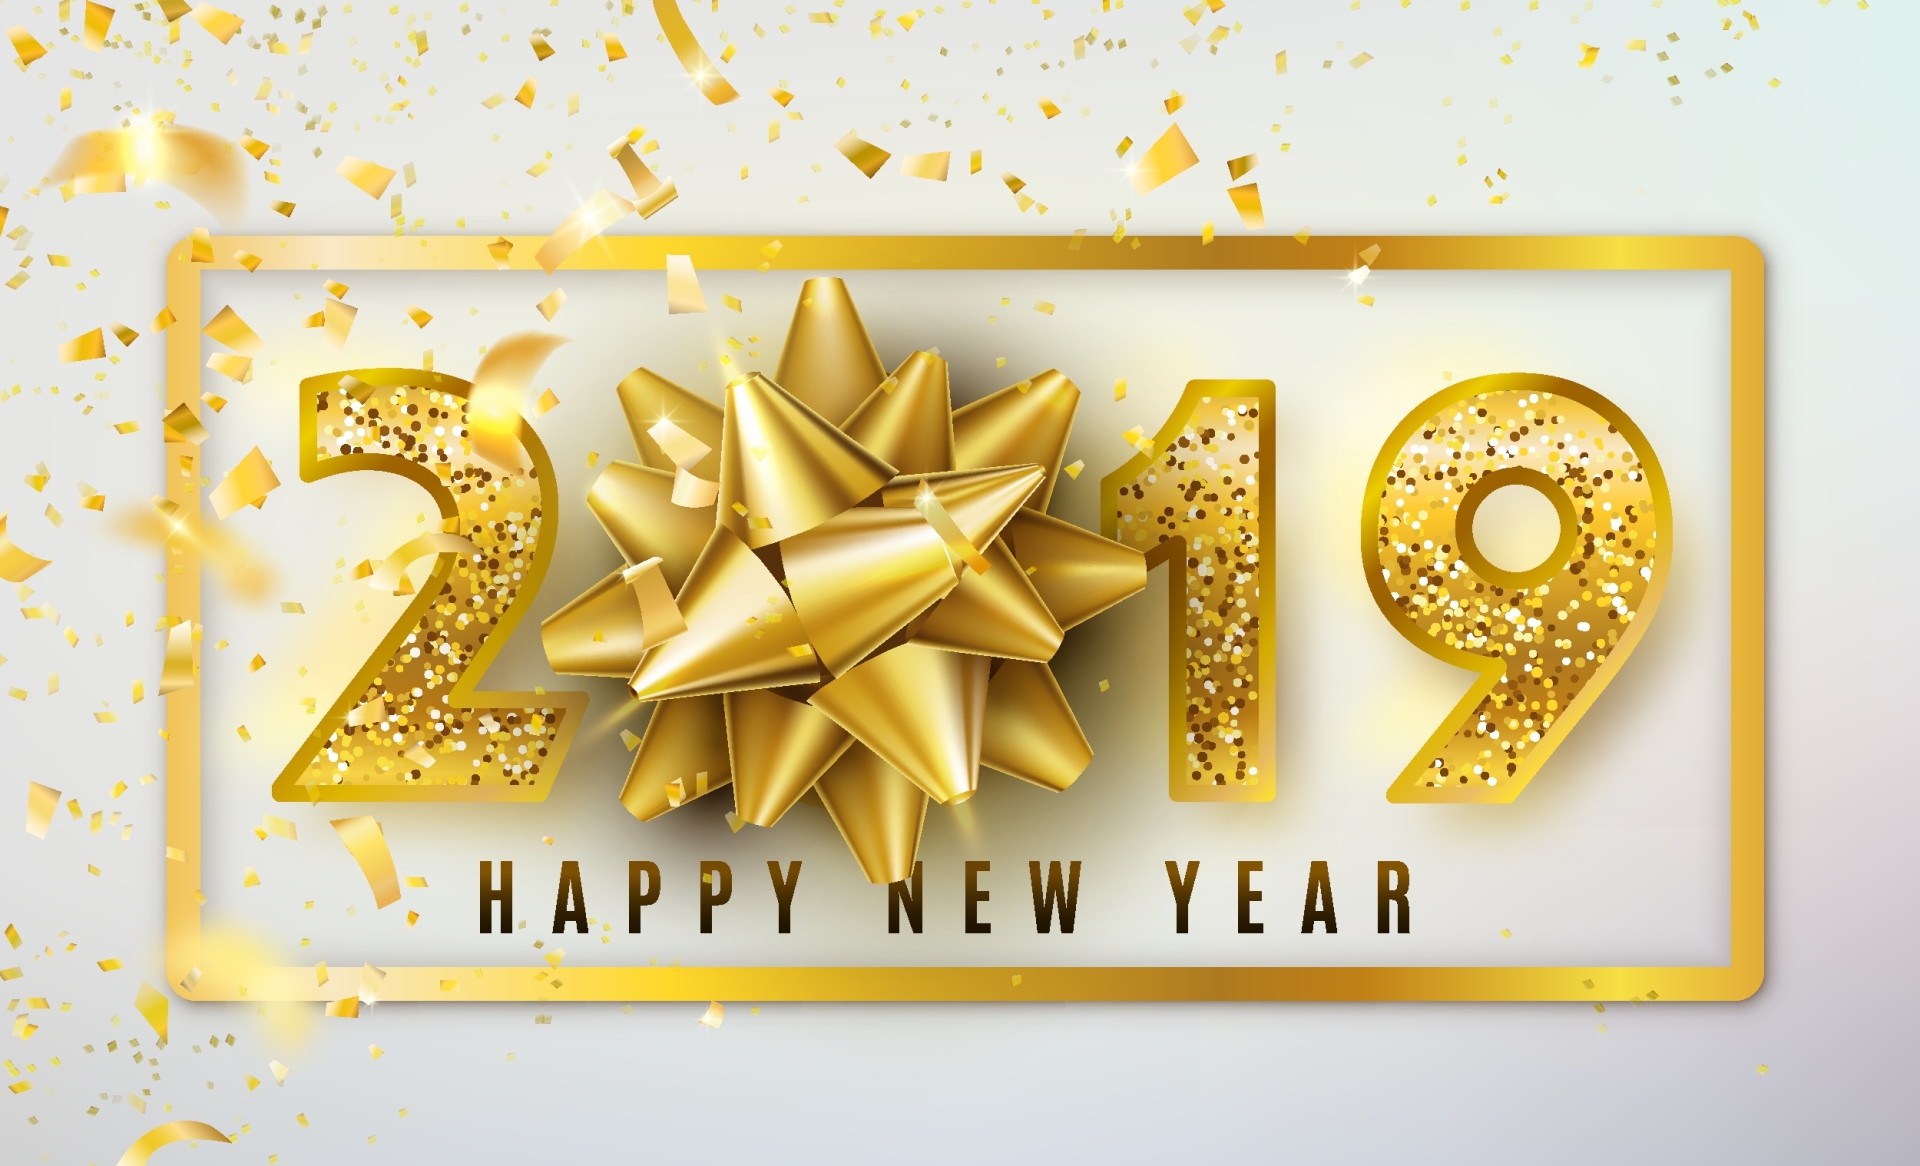 new design wallpaper,text,font,yellow,gold,new year